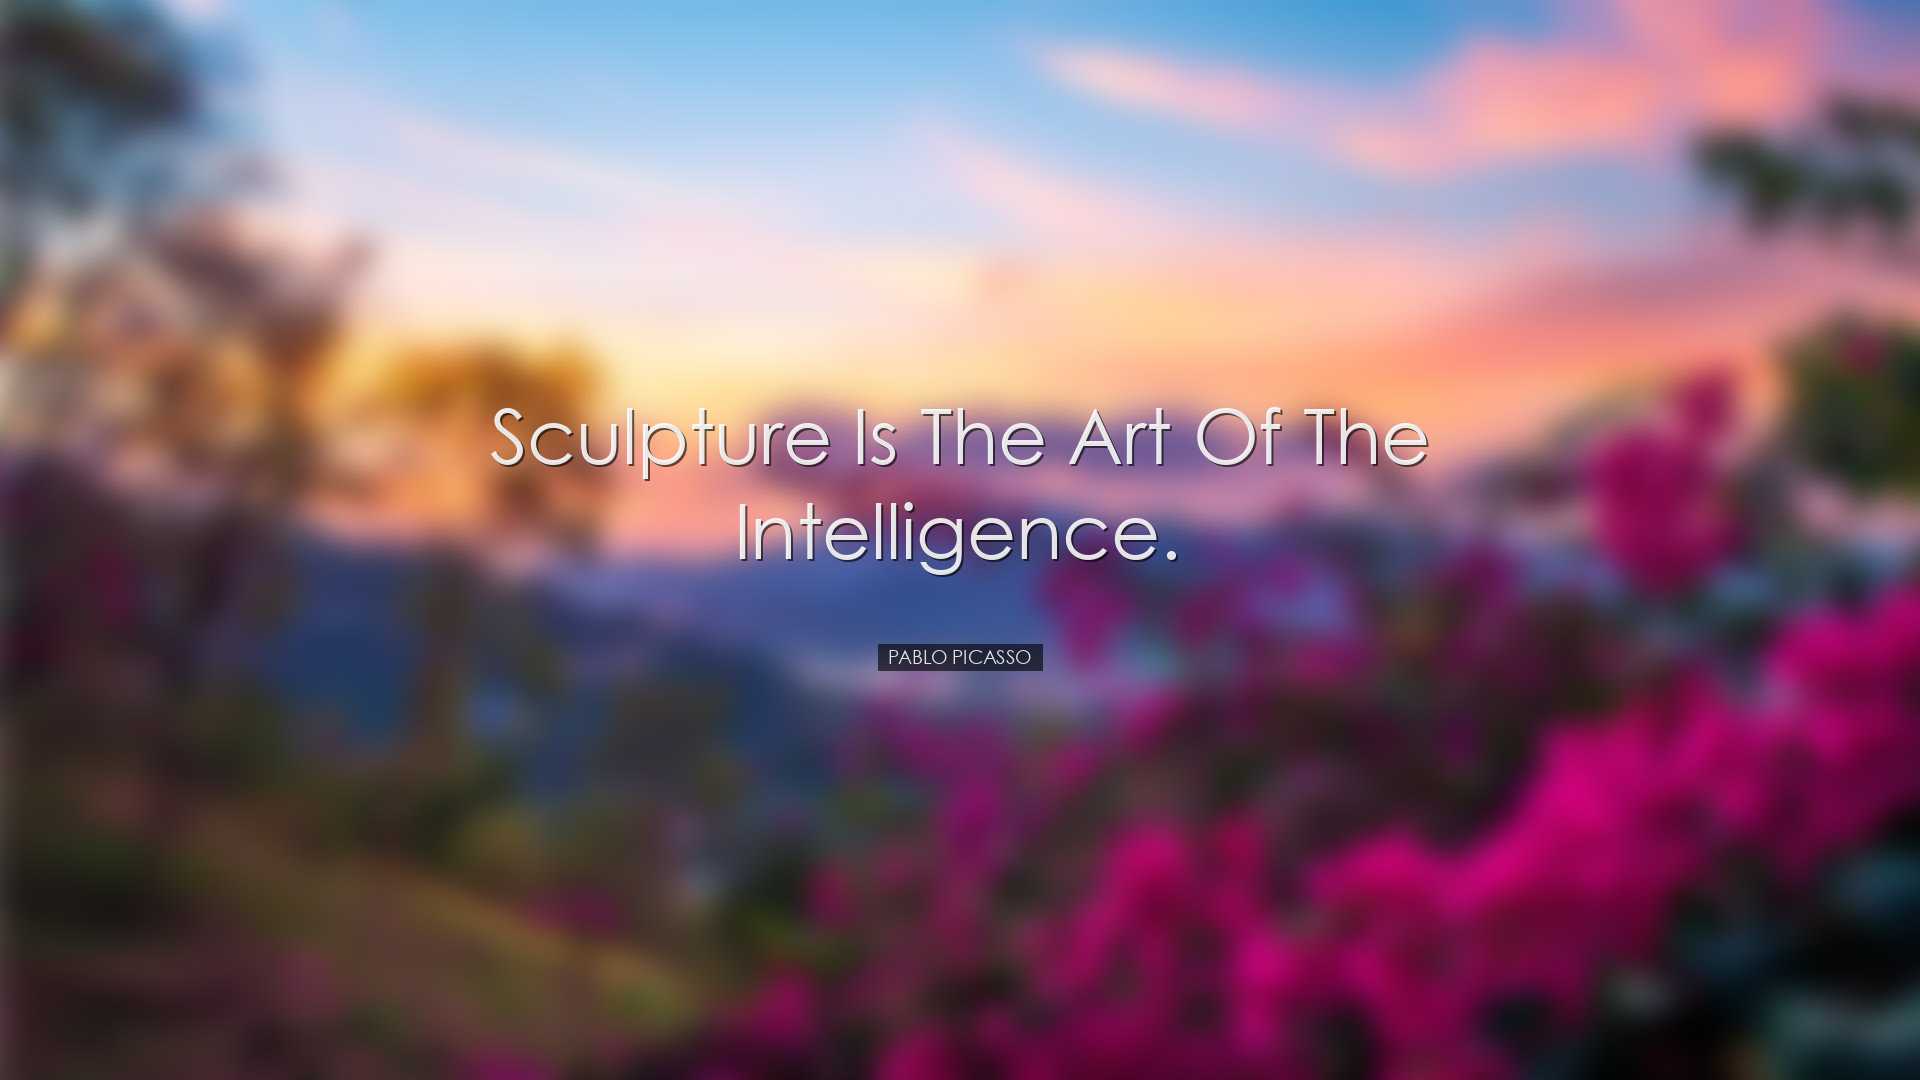 Sculpture is the art of the intelligence. - Pablo Picasso